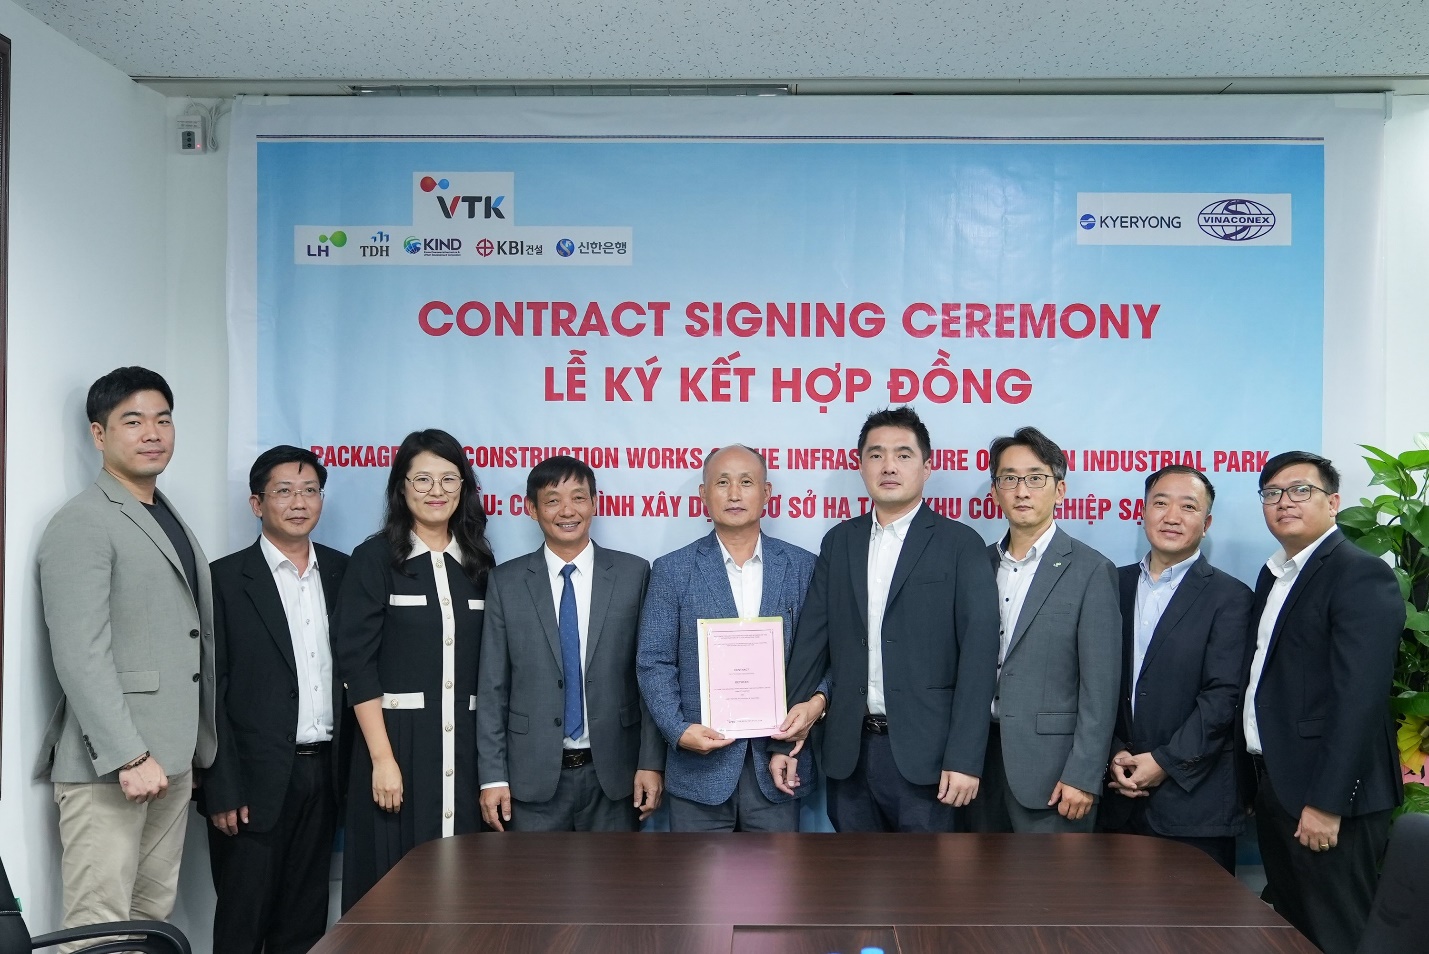 VINACONEX KEEPS WINNING OVER THE TRUST OF FOREIGN INVESTORS AT THE CLEAN INDUSTRIAL PARK PROJECT IN HUNG YEN